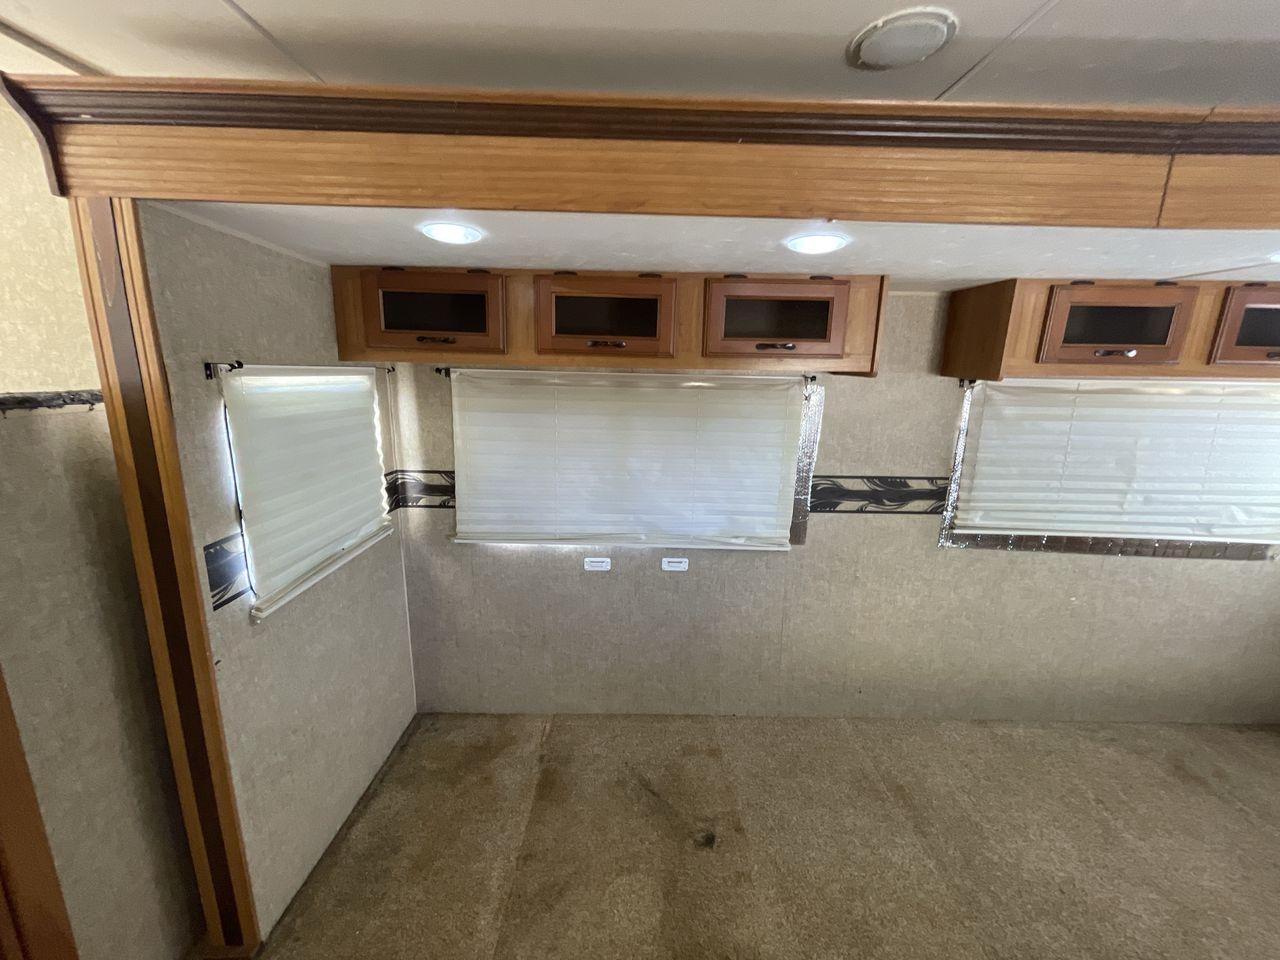 2014 BEIGE KZRV SPREE 282BHS (4EZTL2826E8) , Length: 31.33 ft. | Dry Weight: 5,610 lbs. | Gross Weight: 6,800 lbs. | Slides: 1 transmission, located at 4319 N Main St, Cleburne, TX, 76033, (817) 678-5133, 32.385960, -97.391212 - Take the 2014 KZ RV Spree 282BHS Travel Trailer on your next vacation. Comfort, style, and functionality are all combined in this well-designed travel trailer, which makes it a great option for families or groups looking for a dependable and roomy mobile home. This trailer measures 31.33 ft in le - Photo #14